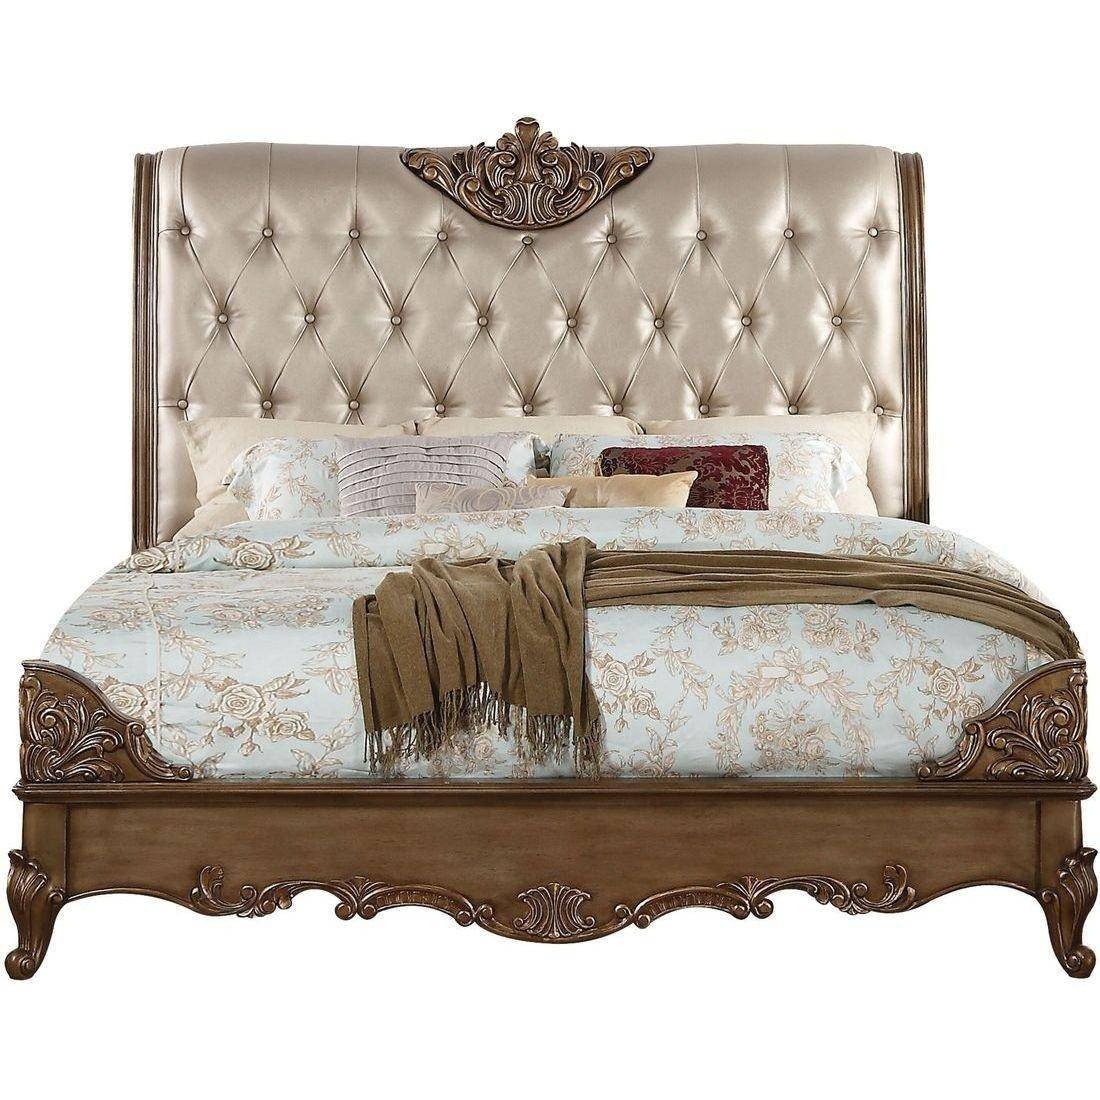 Luxury King Bedroom Set New Luxury King Bedroom Set 3 Antique Gold Champagne F Leather